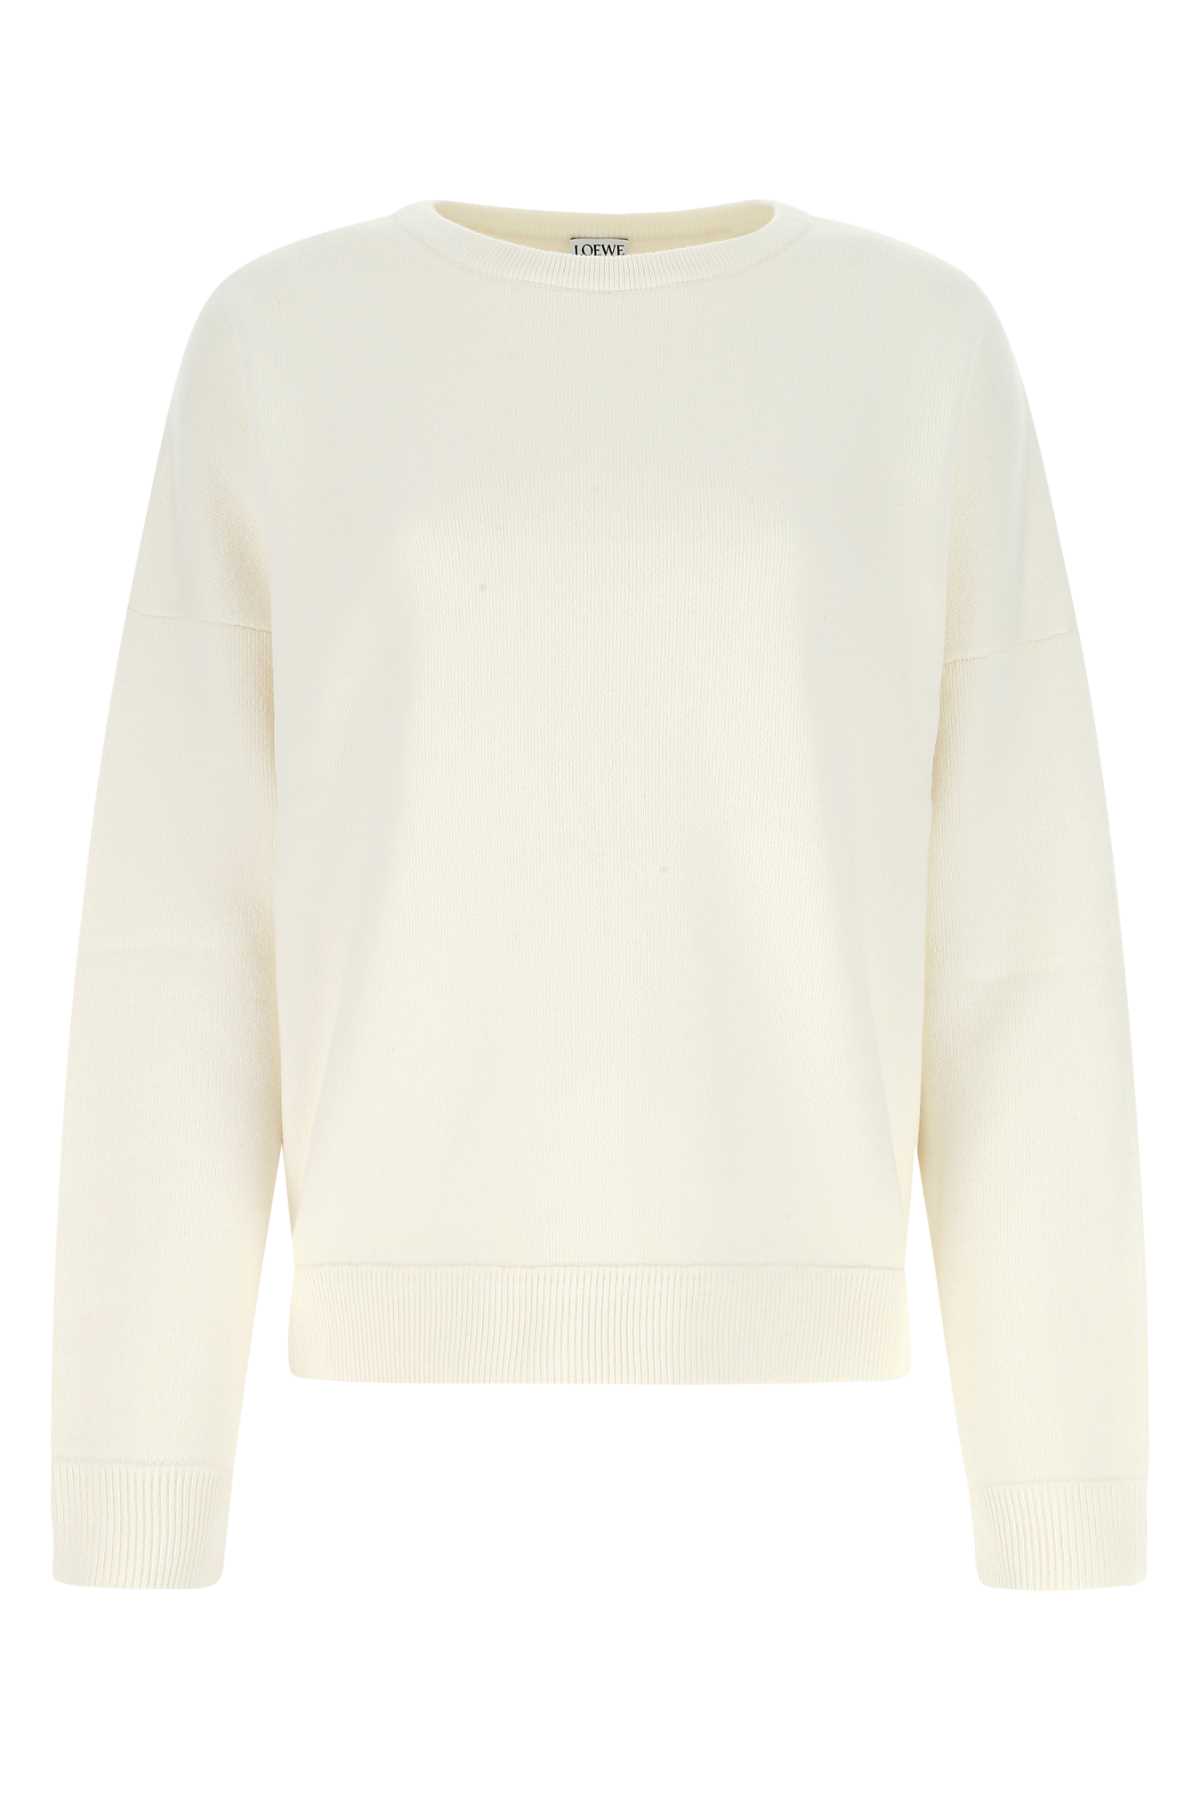 Shop Loewe Ivory Cashmere Blend Oversize Sweater In Softwhite